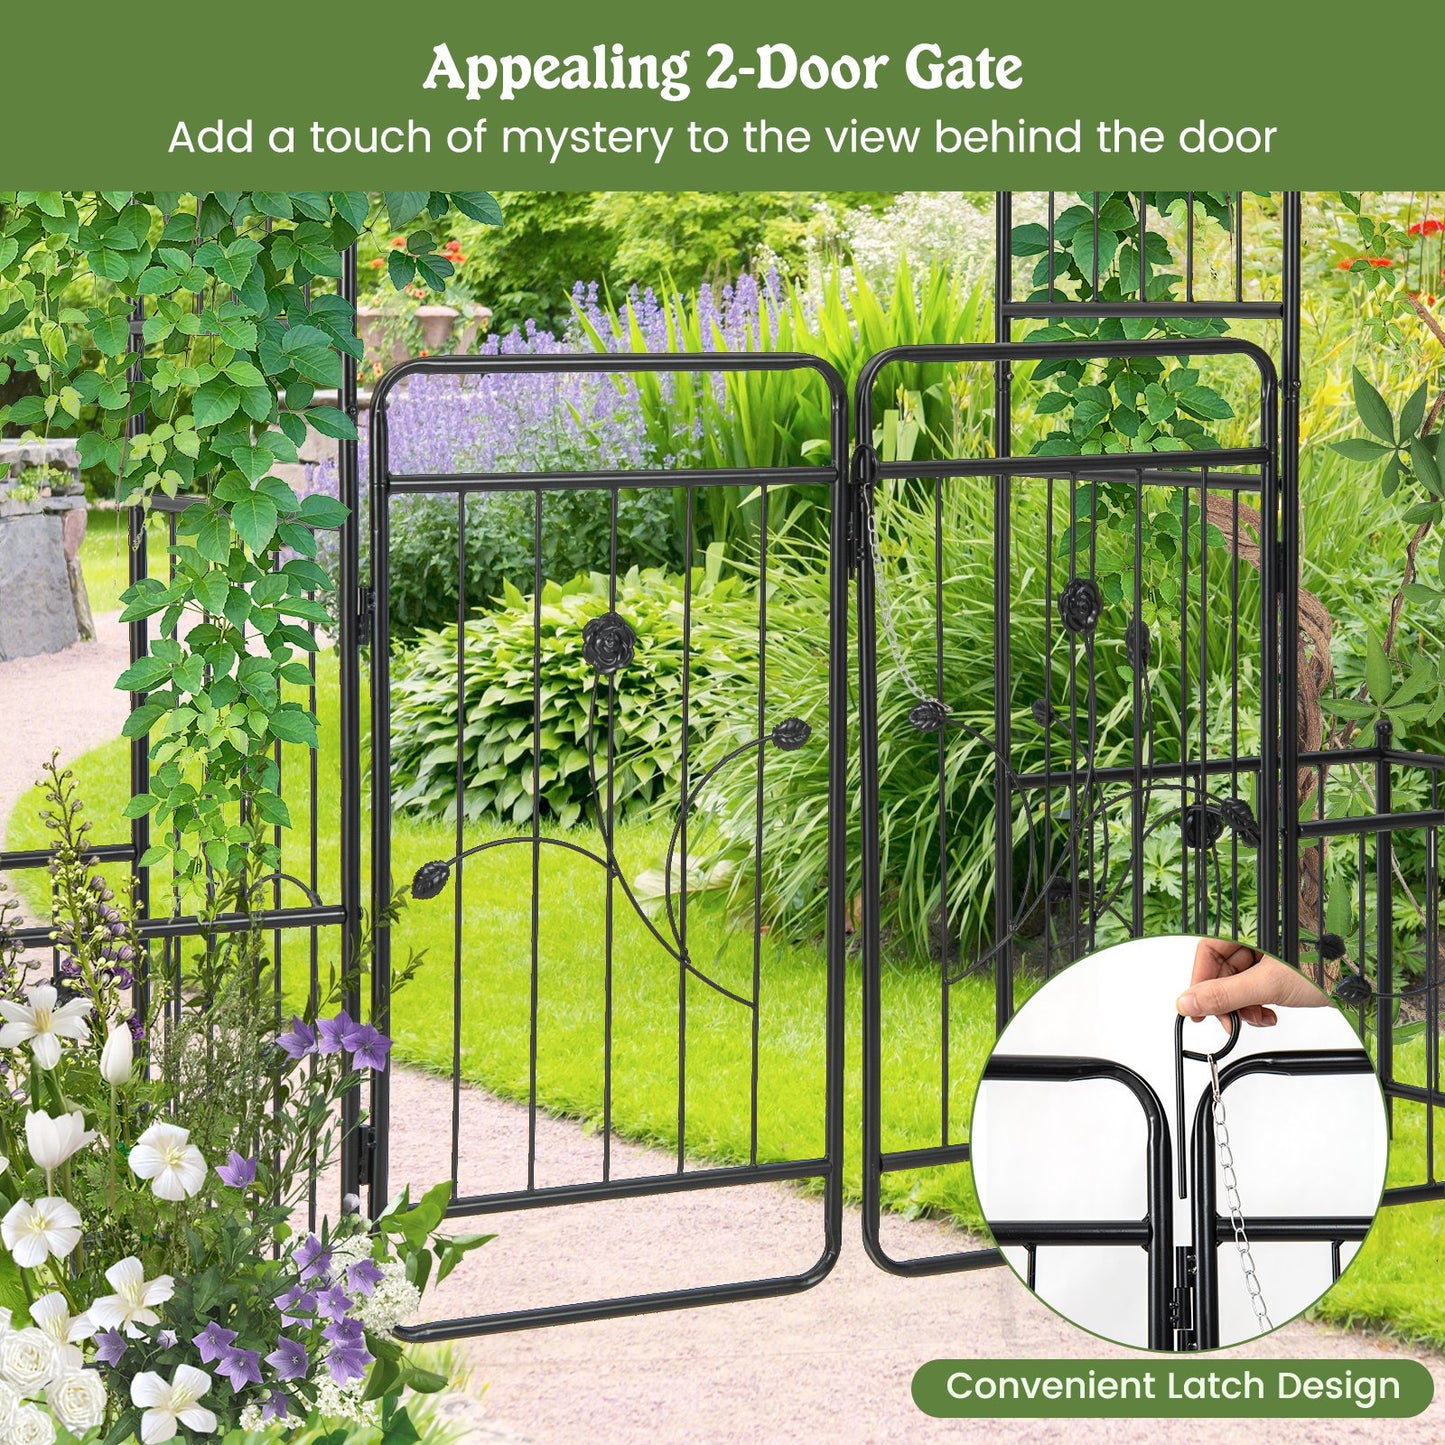 87 Inches Garden Arbor with Lockable Gate Side Planters, Black